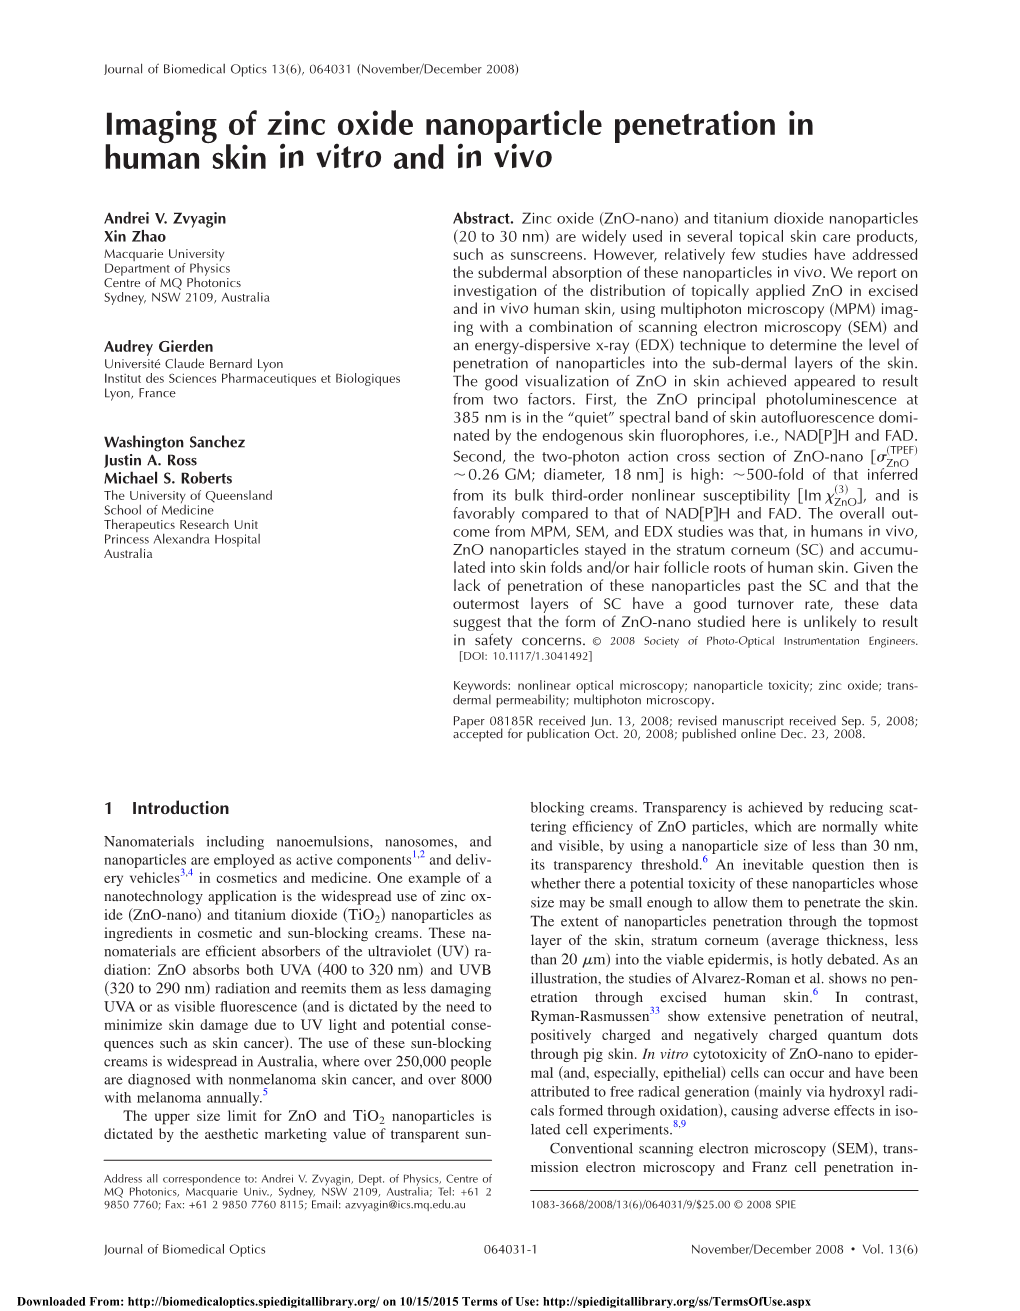 Imaging of Zinc Oxide Nanoparticle Penetration in Human Skin in Vitro and in Vivo